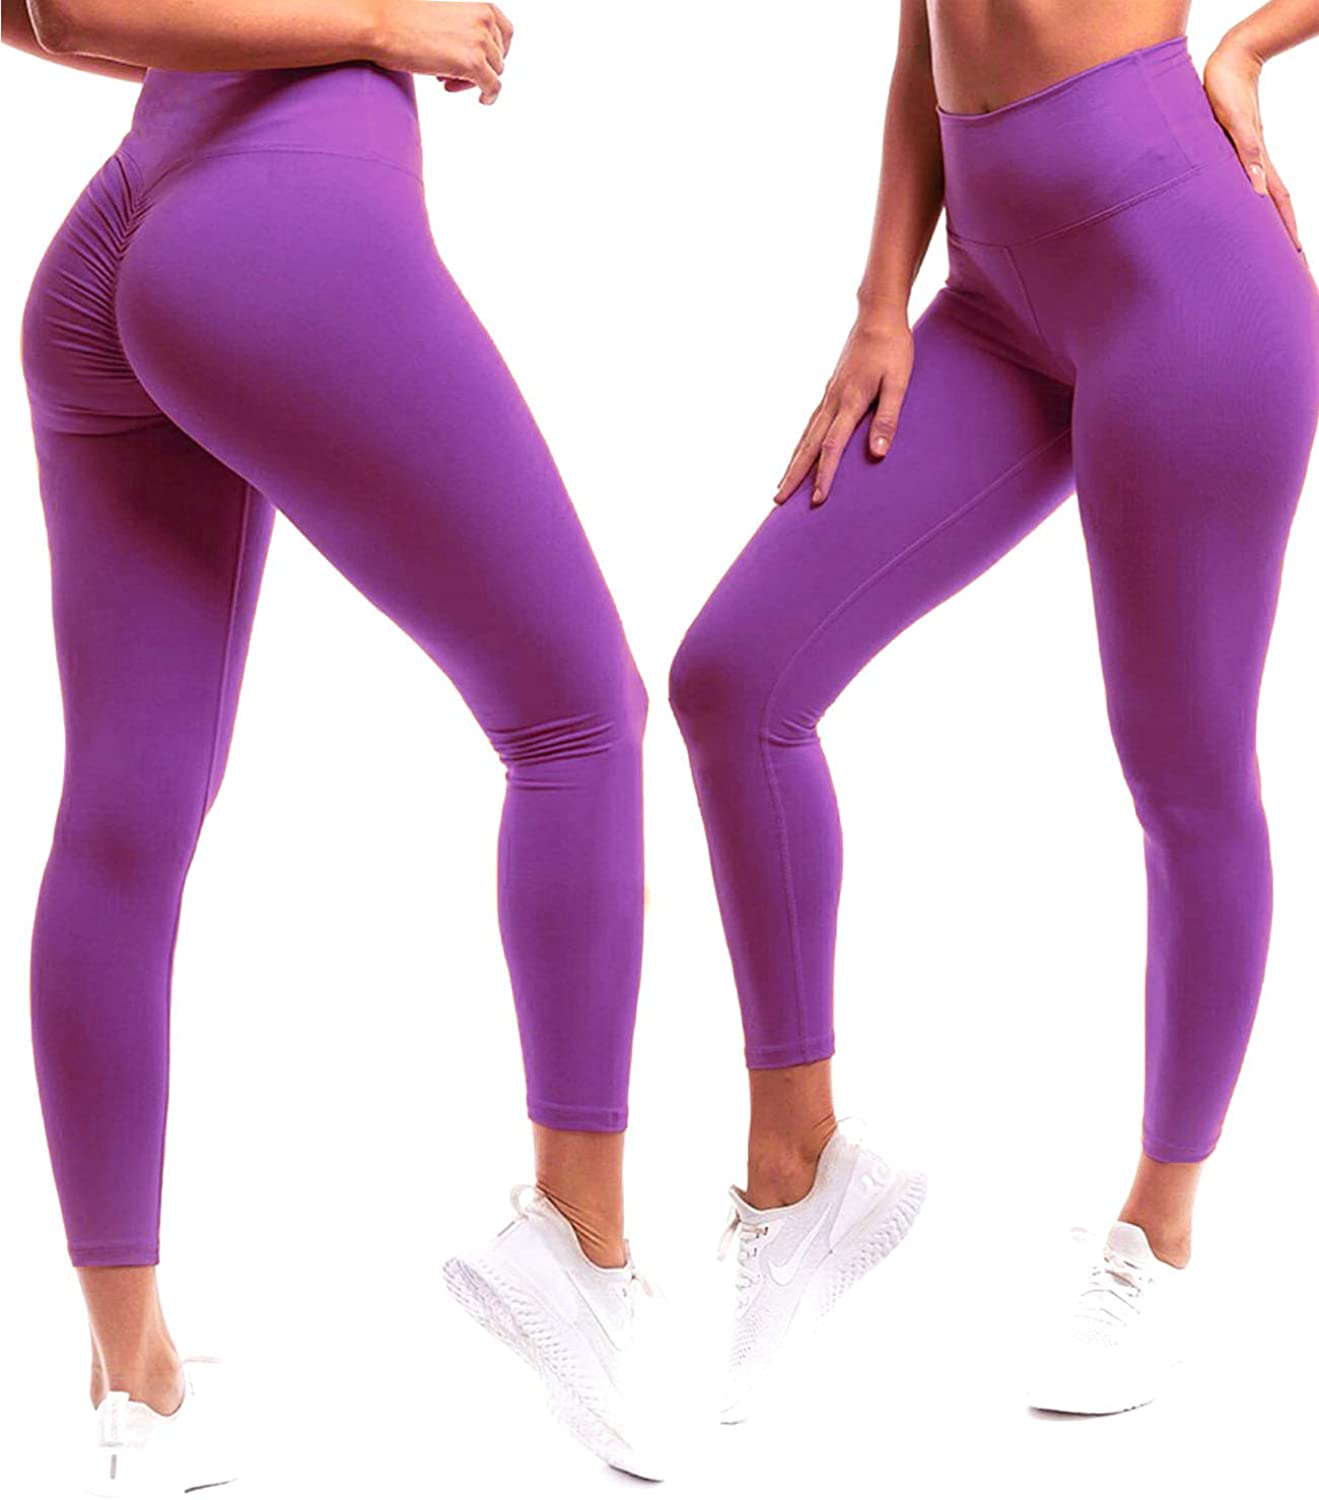 Pxiakgy yoga pants women Women Soft High Waist Stretch Pleated Yoga Pants  Casual Seven Points Leggings crazy yoga leggings womens yoga pants Purple +